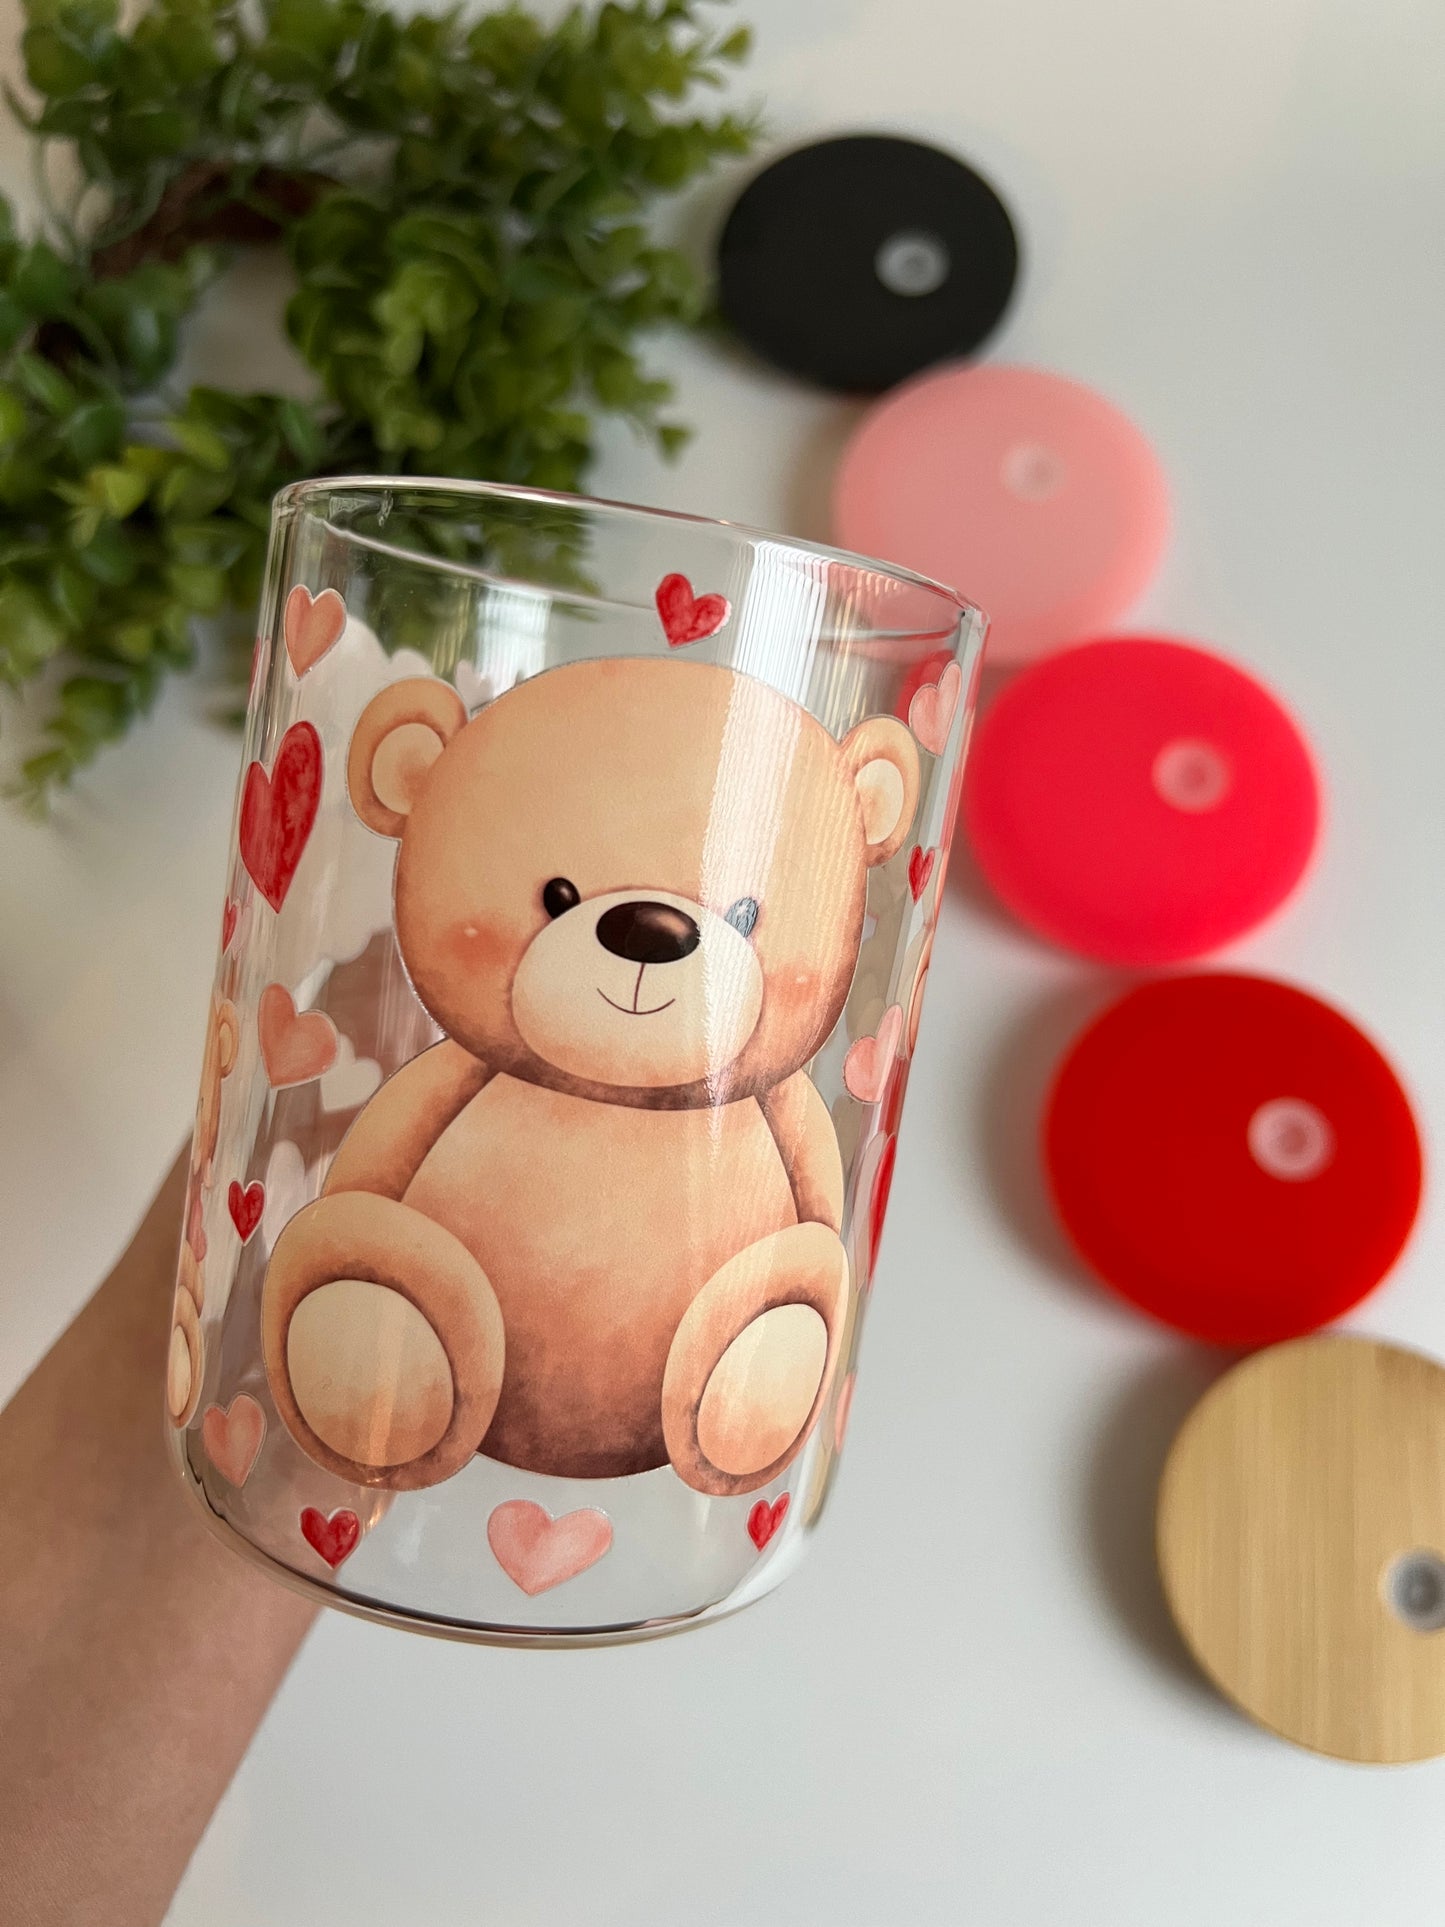 Valentines Mug 17 Ounce Clear and Frosted Circular Glass Mugs with Colored Lids and Plastic Straw